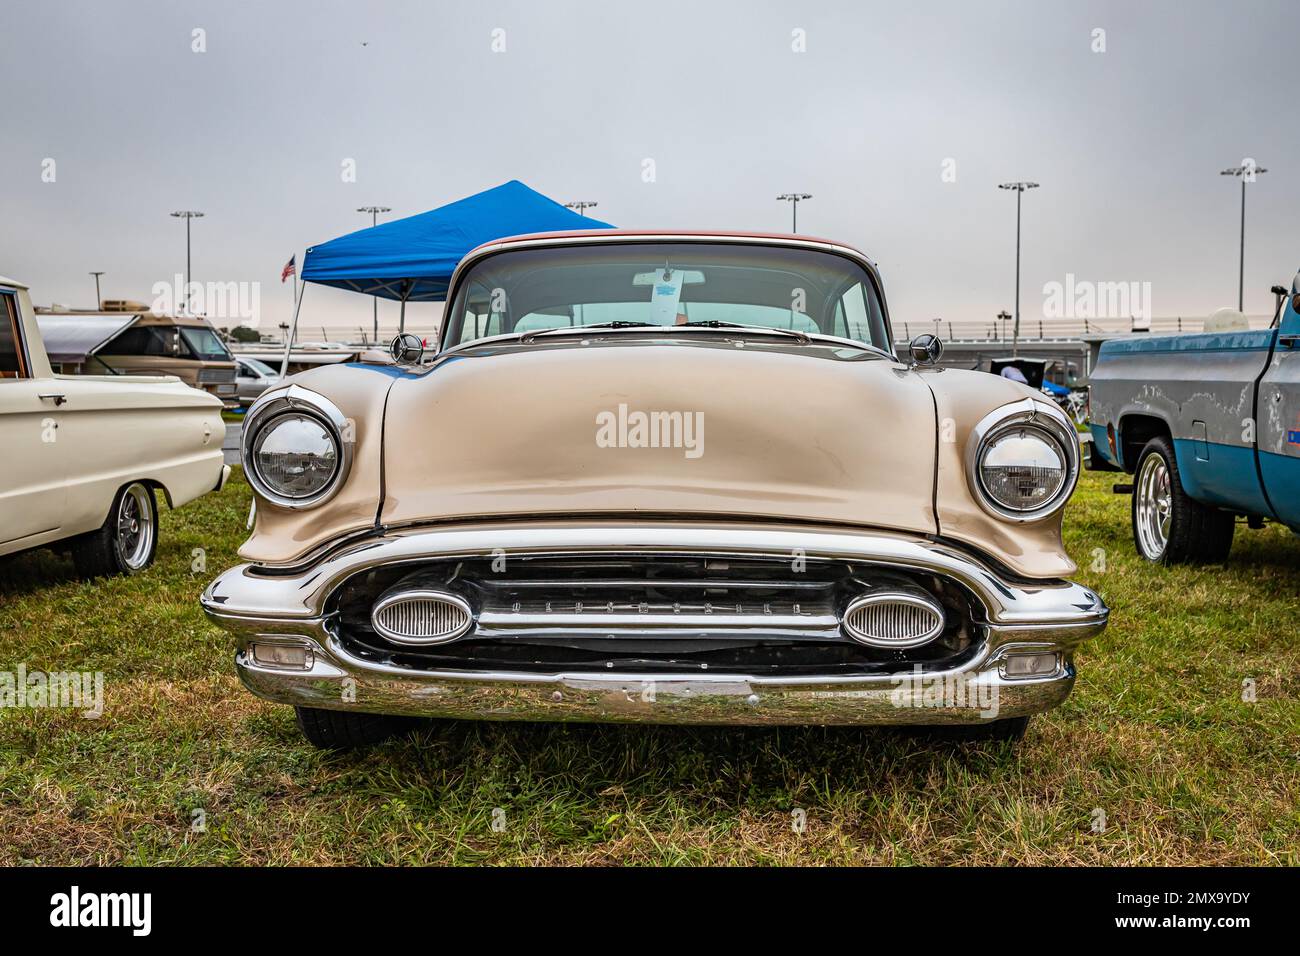 Daytona Beach, FL - November 26, 2022: Low perspective front view of a 1955 Oldsmobile 88 2 Door Hardtopat a local car show. Stock Photo